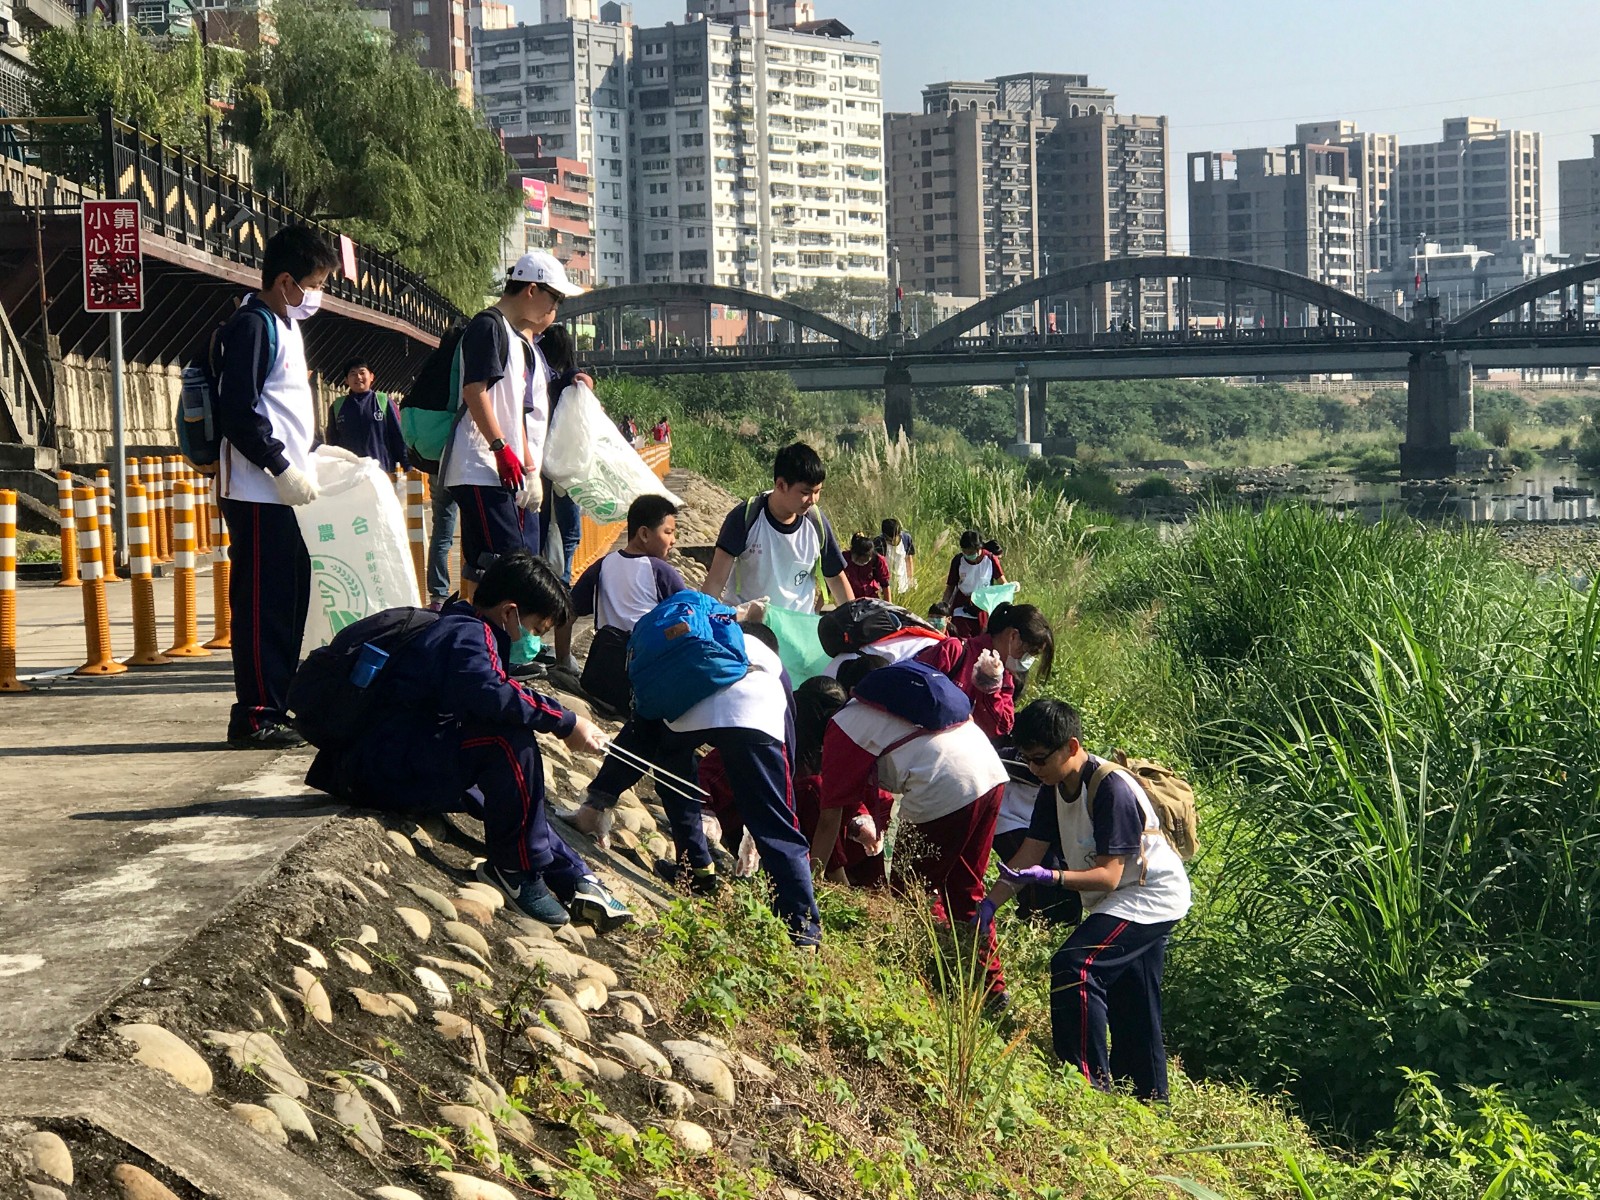 Special Appreciation｜Sanxia Junior High School  Weather: Sunny  Number of people: 84  Hours: 1hrs  Achievements: 14 bags of garbage, a tattered sofa  | Taipei Cultural experience | CAN Culture